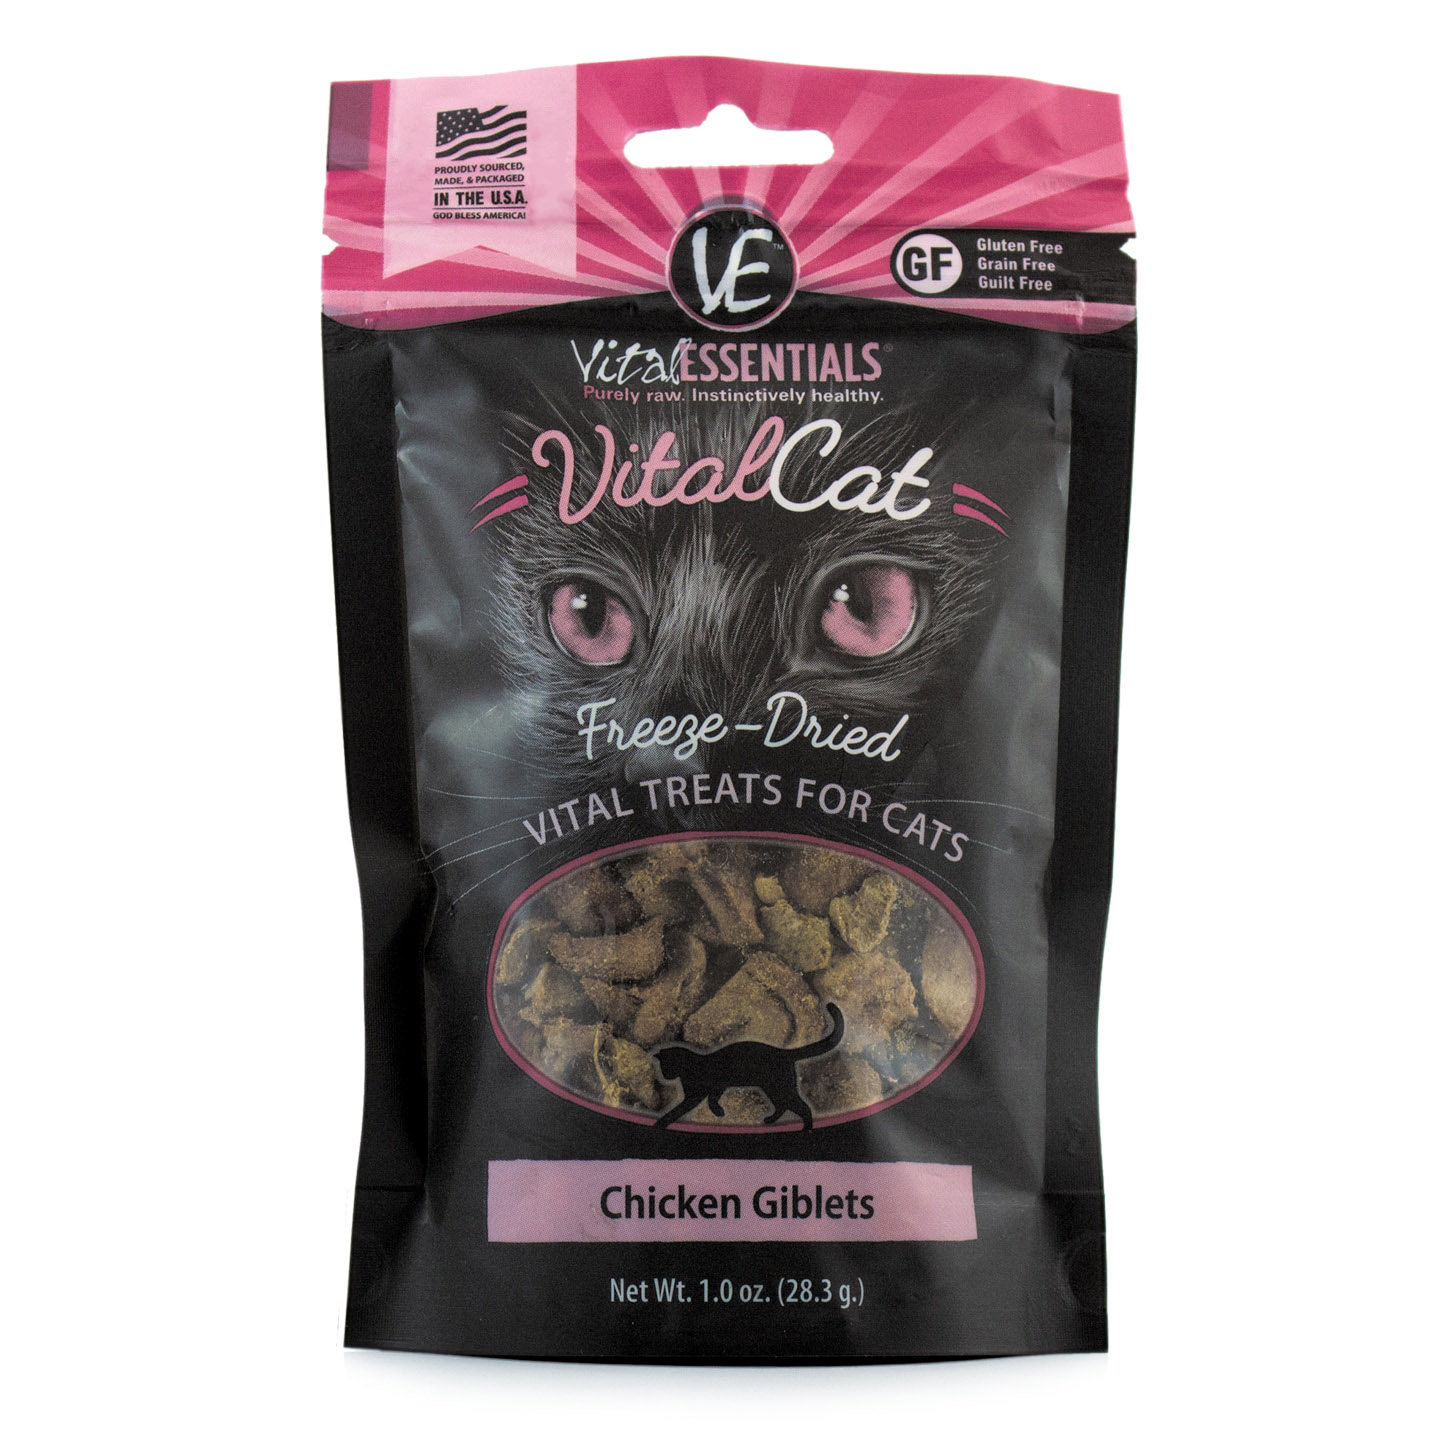 Vital Essentials Chicken Giblets Freeze-Dried Treats for Cats, 1 oz